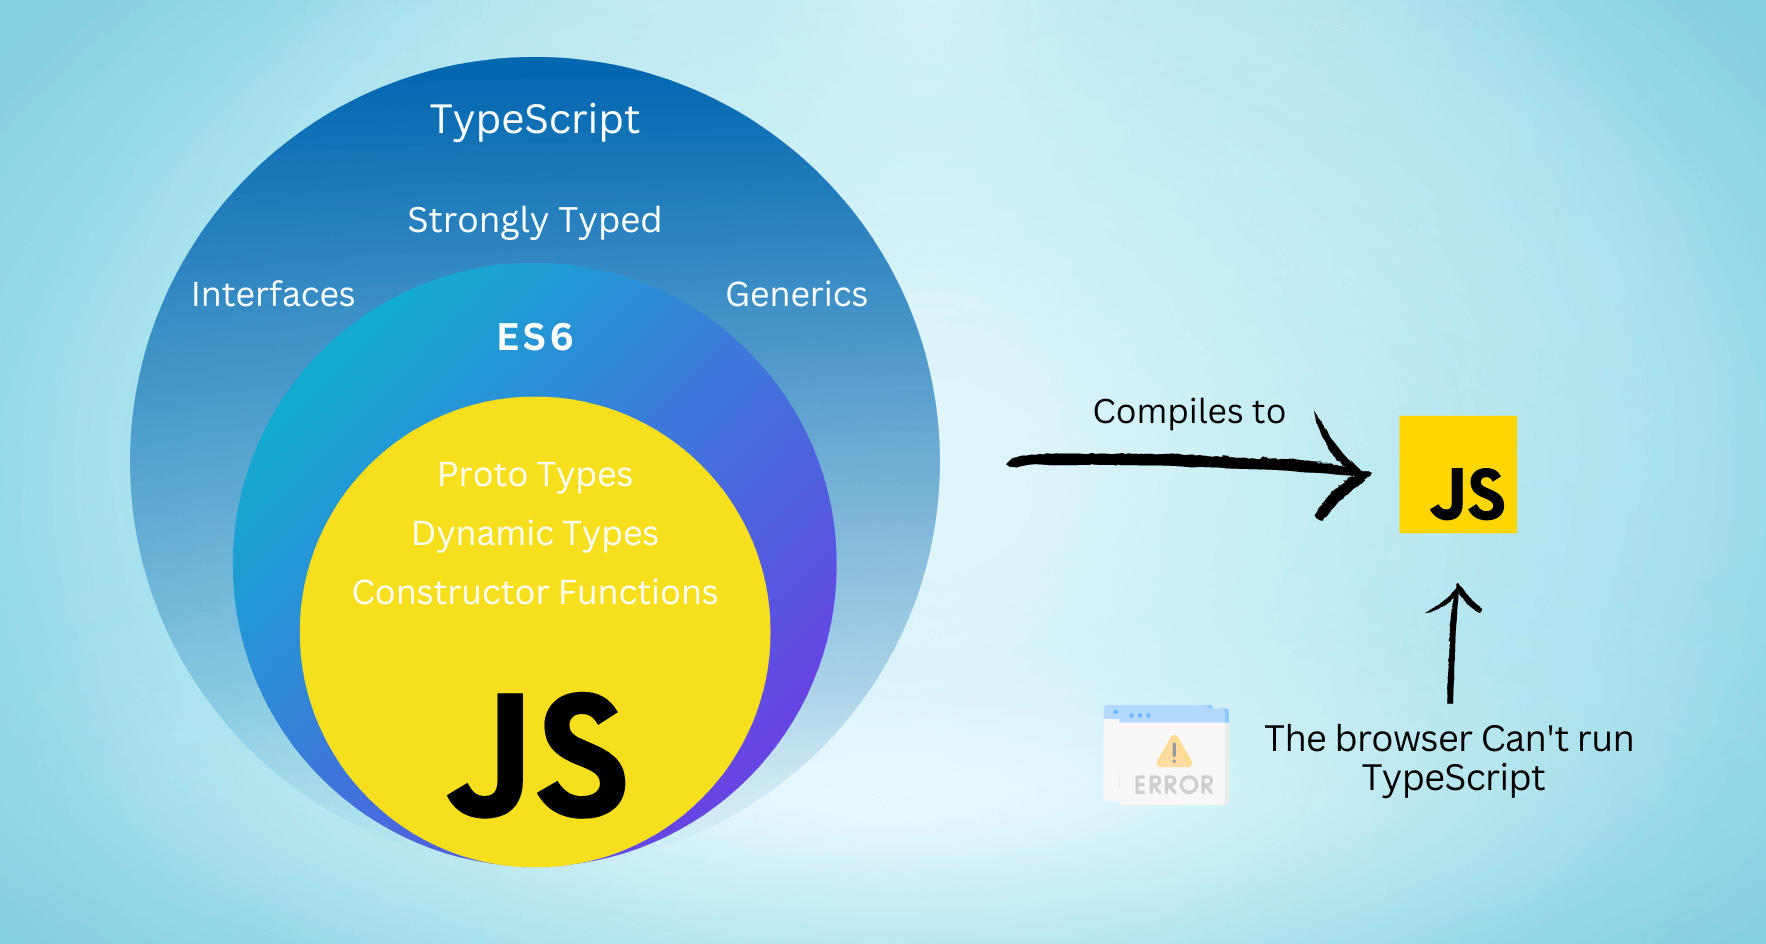 Why TypeScript is better than JavaScript?